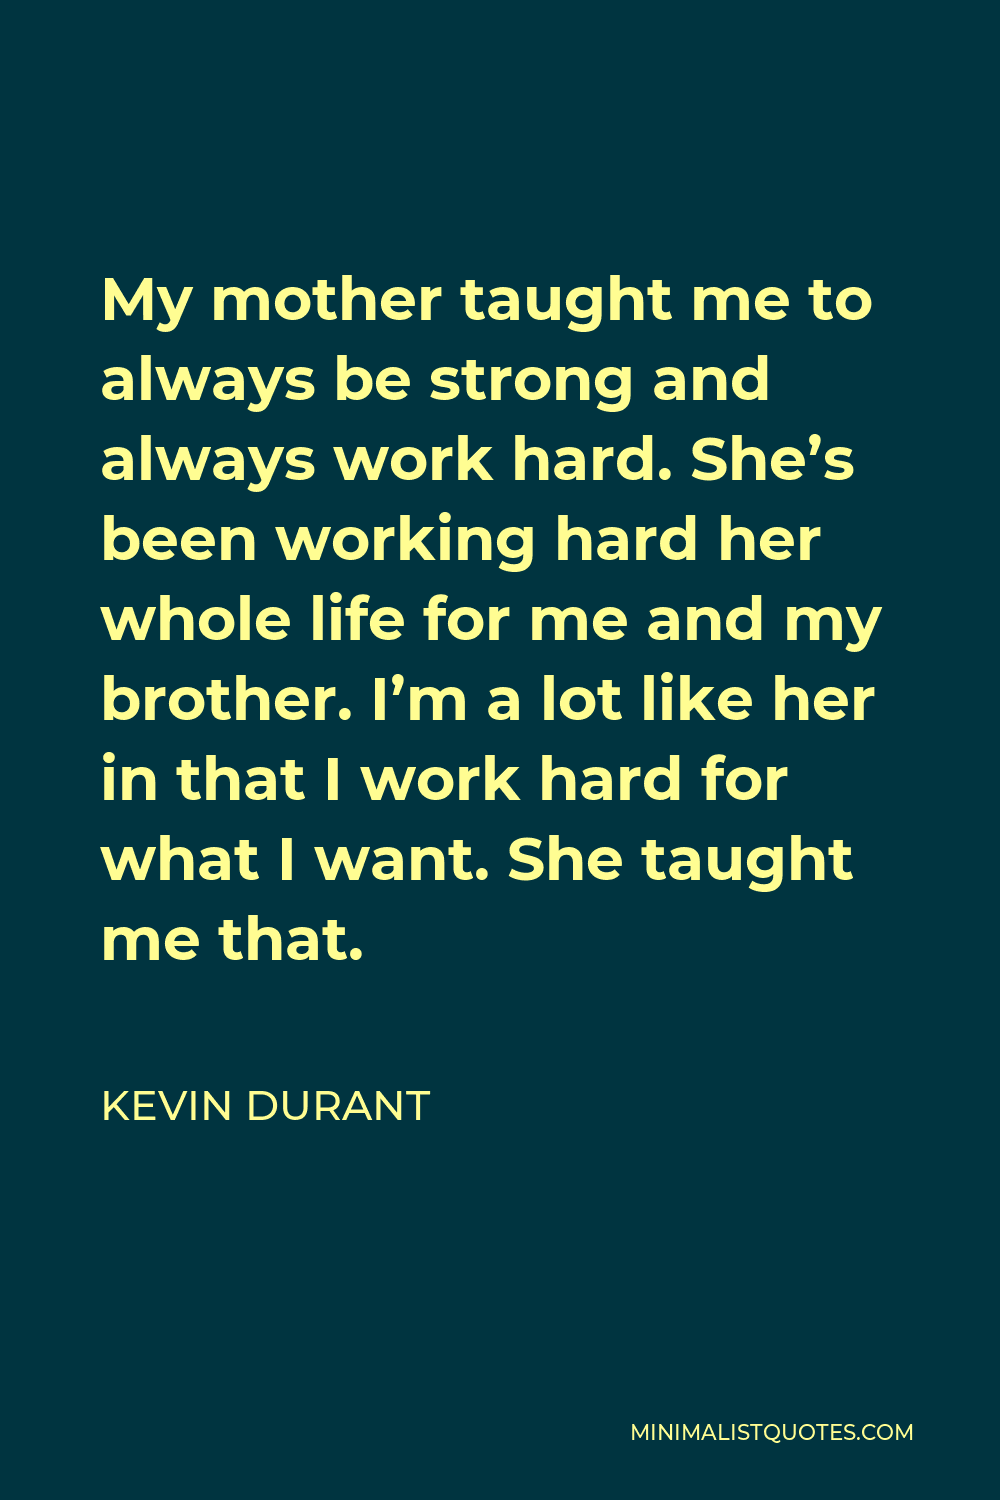 Kevin Durant Quote - My mother taught me to always be strong and always work hard. She’s been working hard her whole life for me and my brother. I’m a lot like her in that I work hard for what I want. She taught me that.